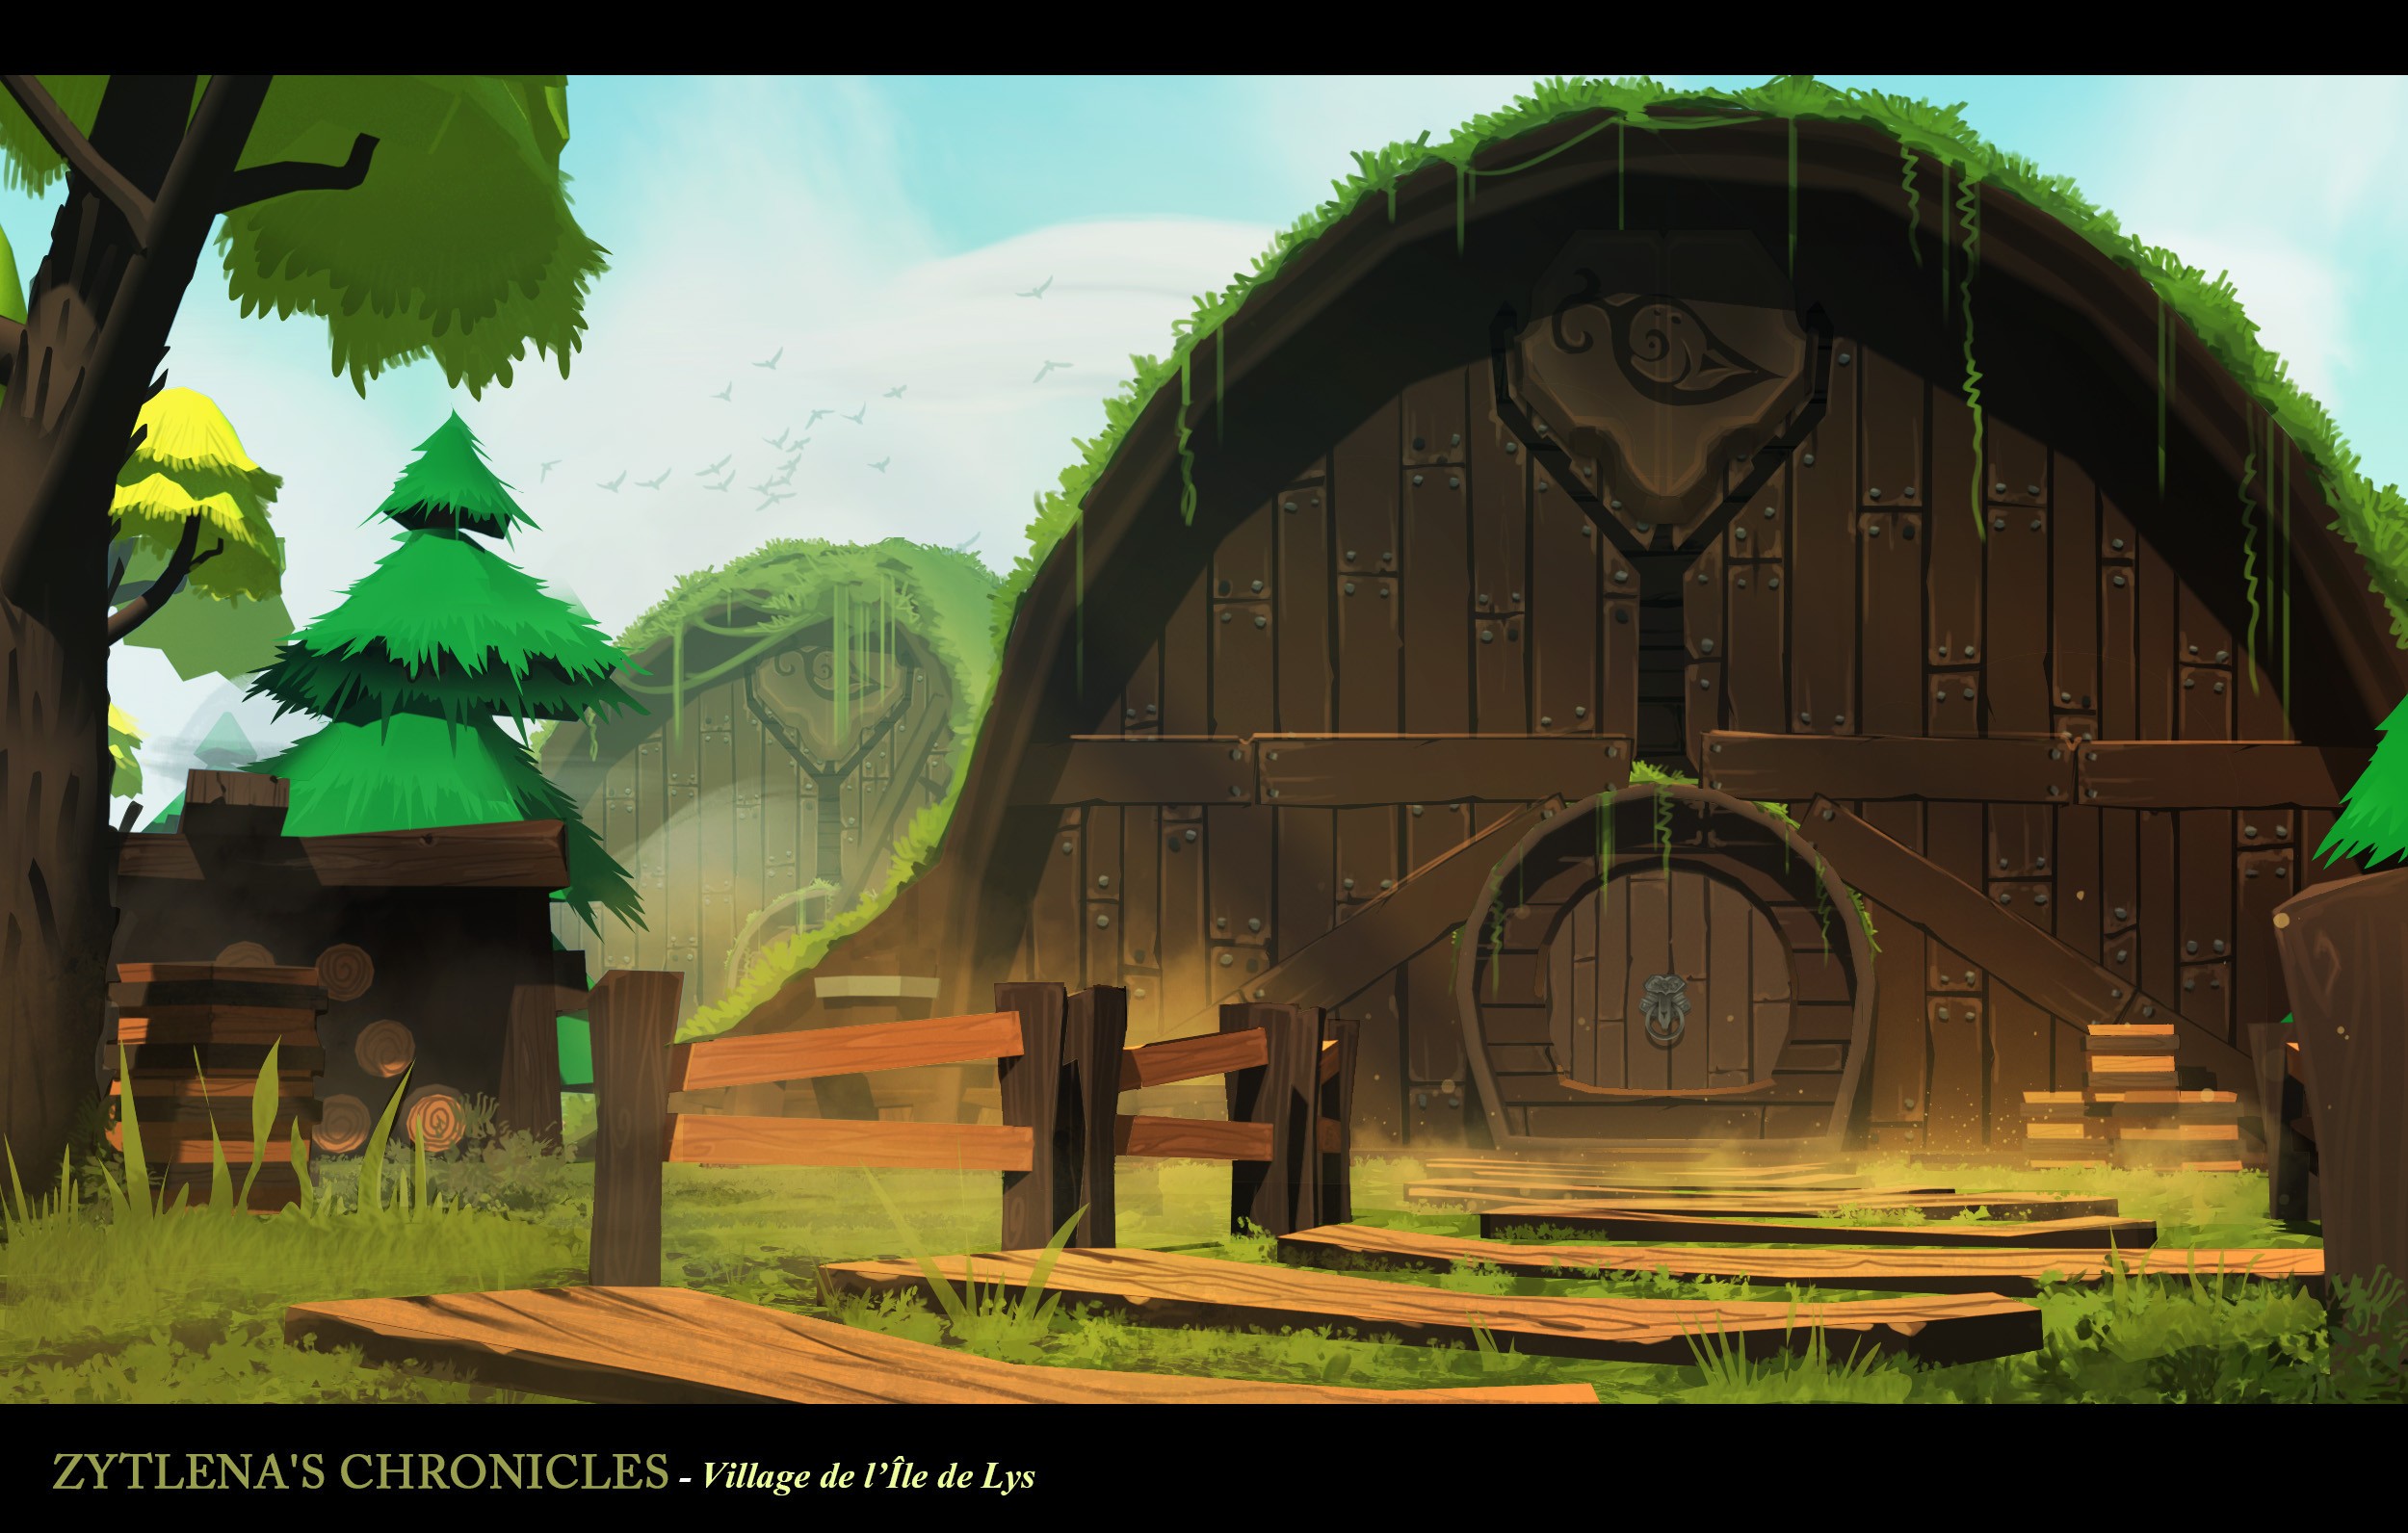 Concepts to Zytlena's Chronicles (old forum project) par Ros Paturaux Fabrice